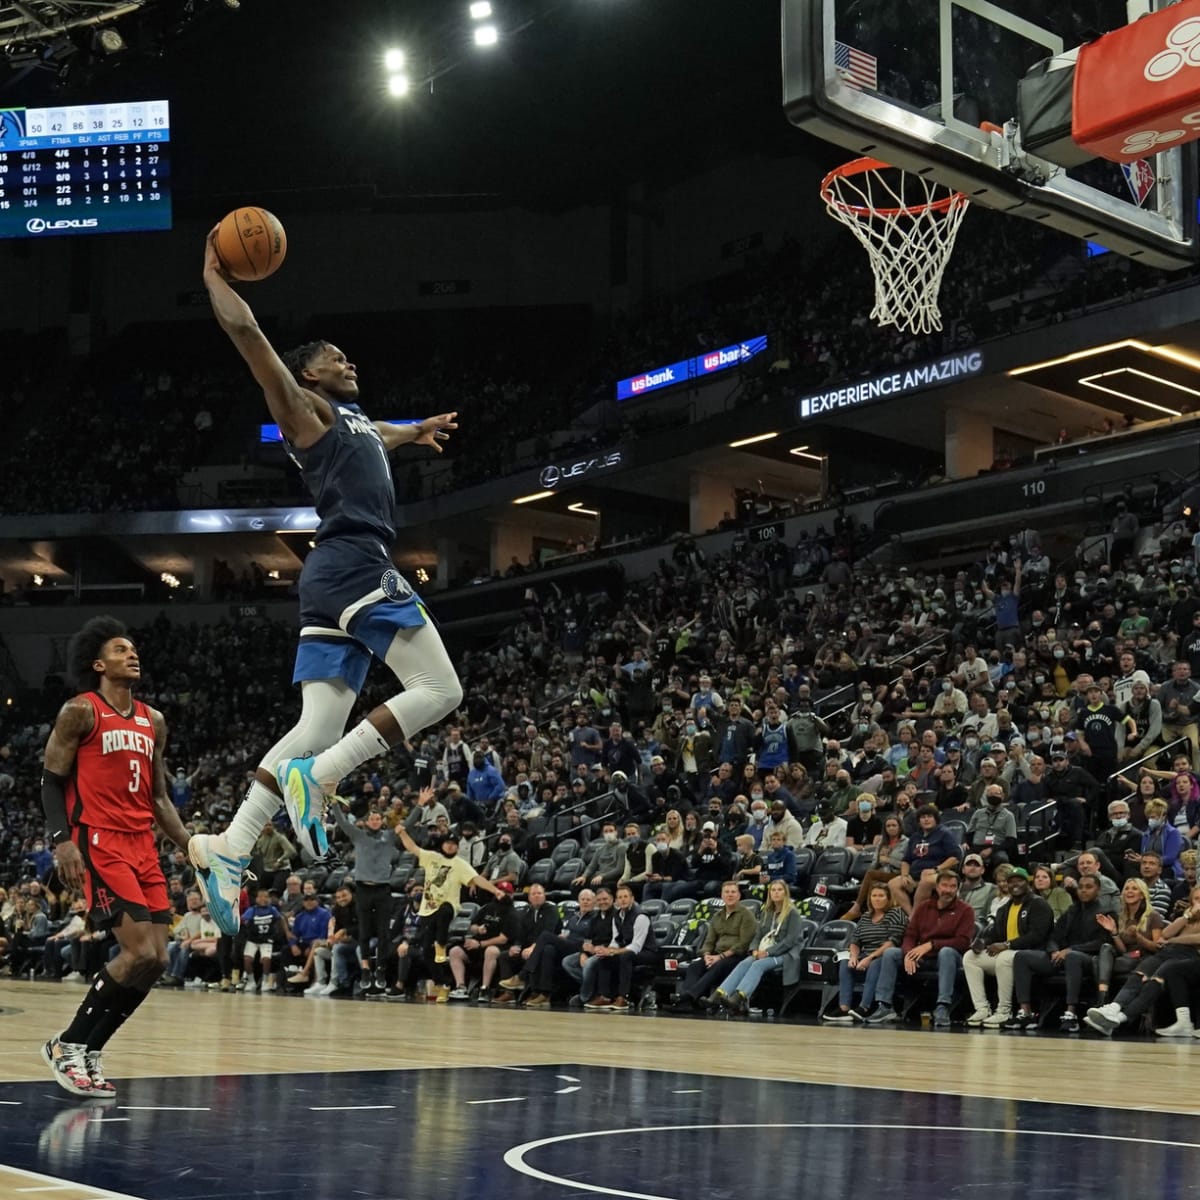 Timberwolves' Anthony Edwards throws down incredible dunk -- but